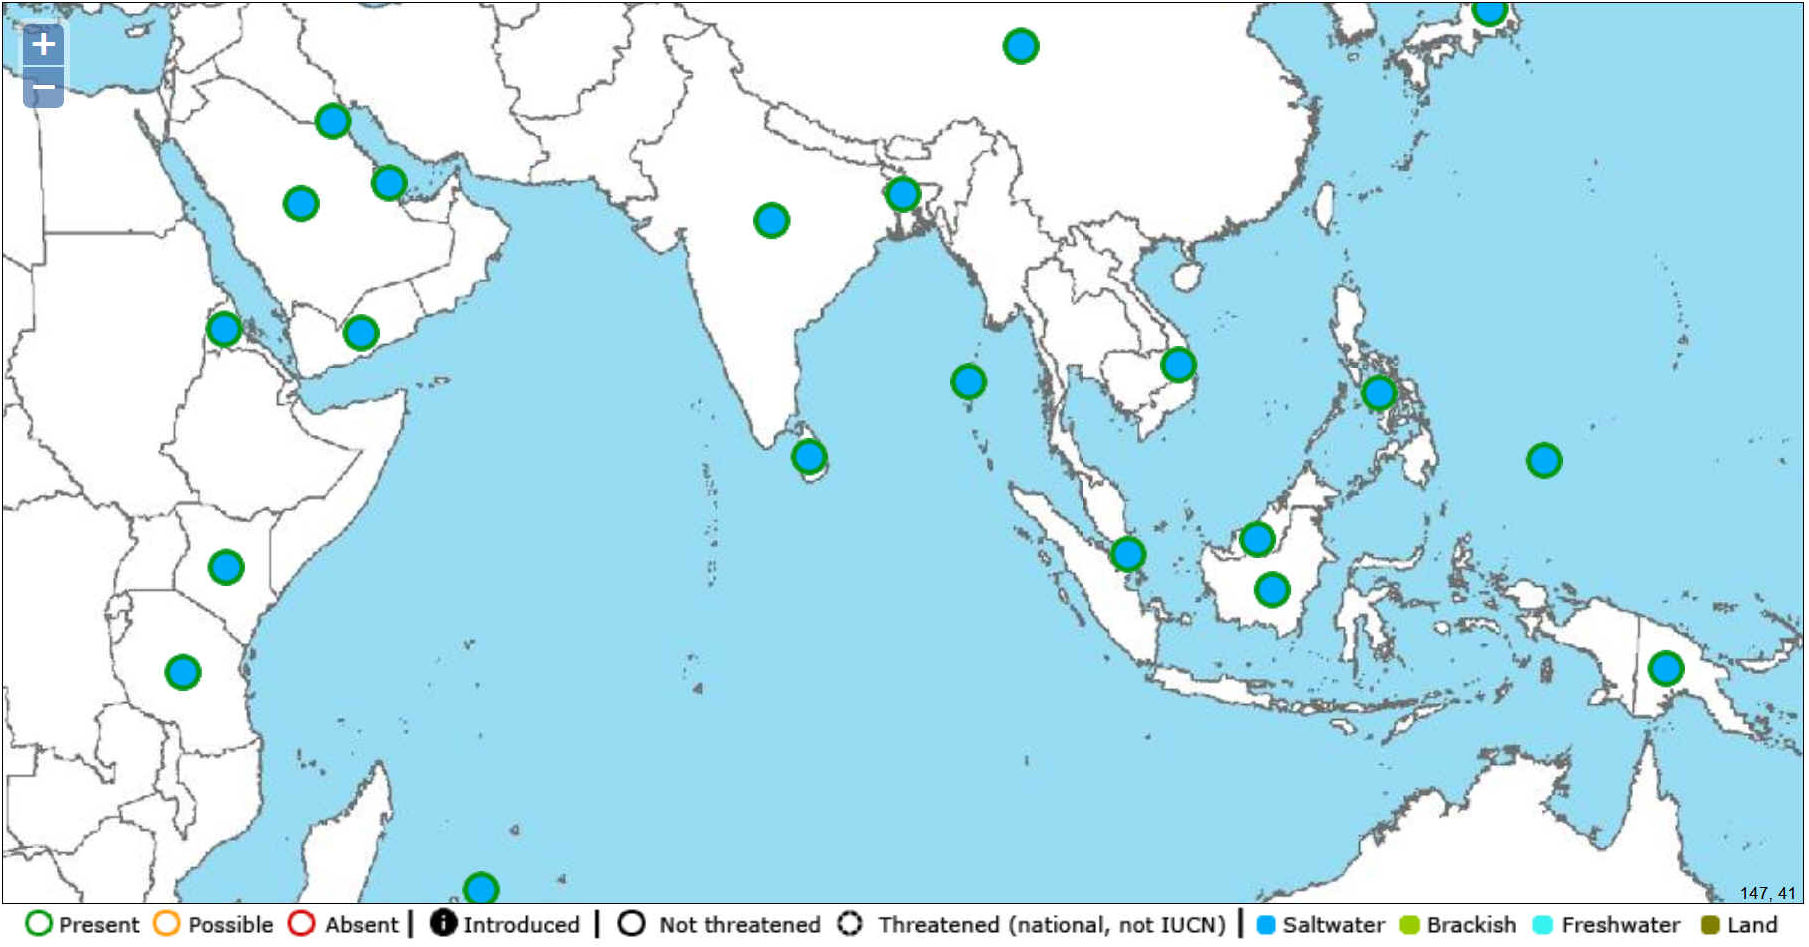 Map of the Indian Ocean and Indonesian archapelago, where conditions for sargassum are dangeroulsy close to blooms of natans and fluitans species